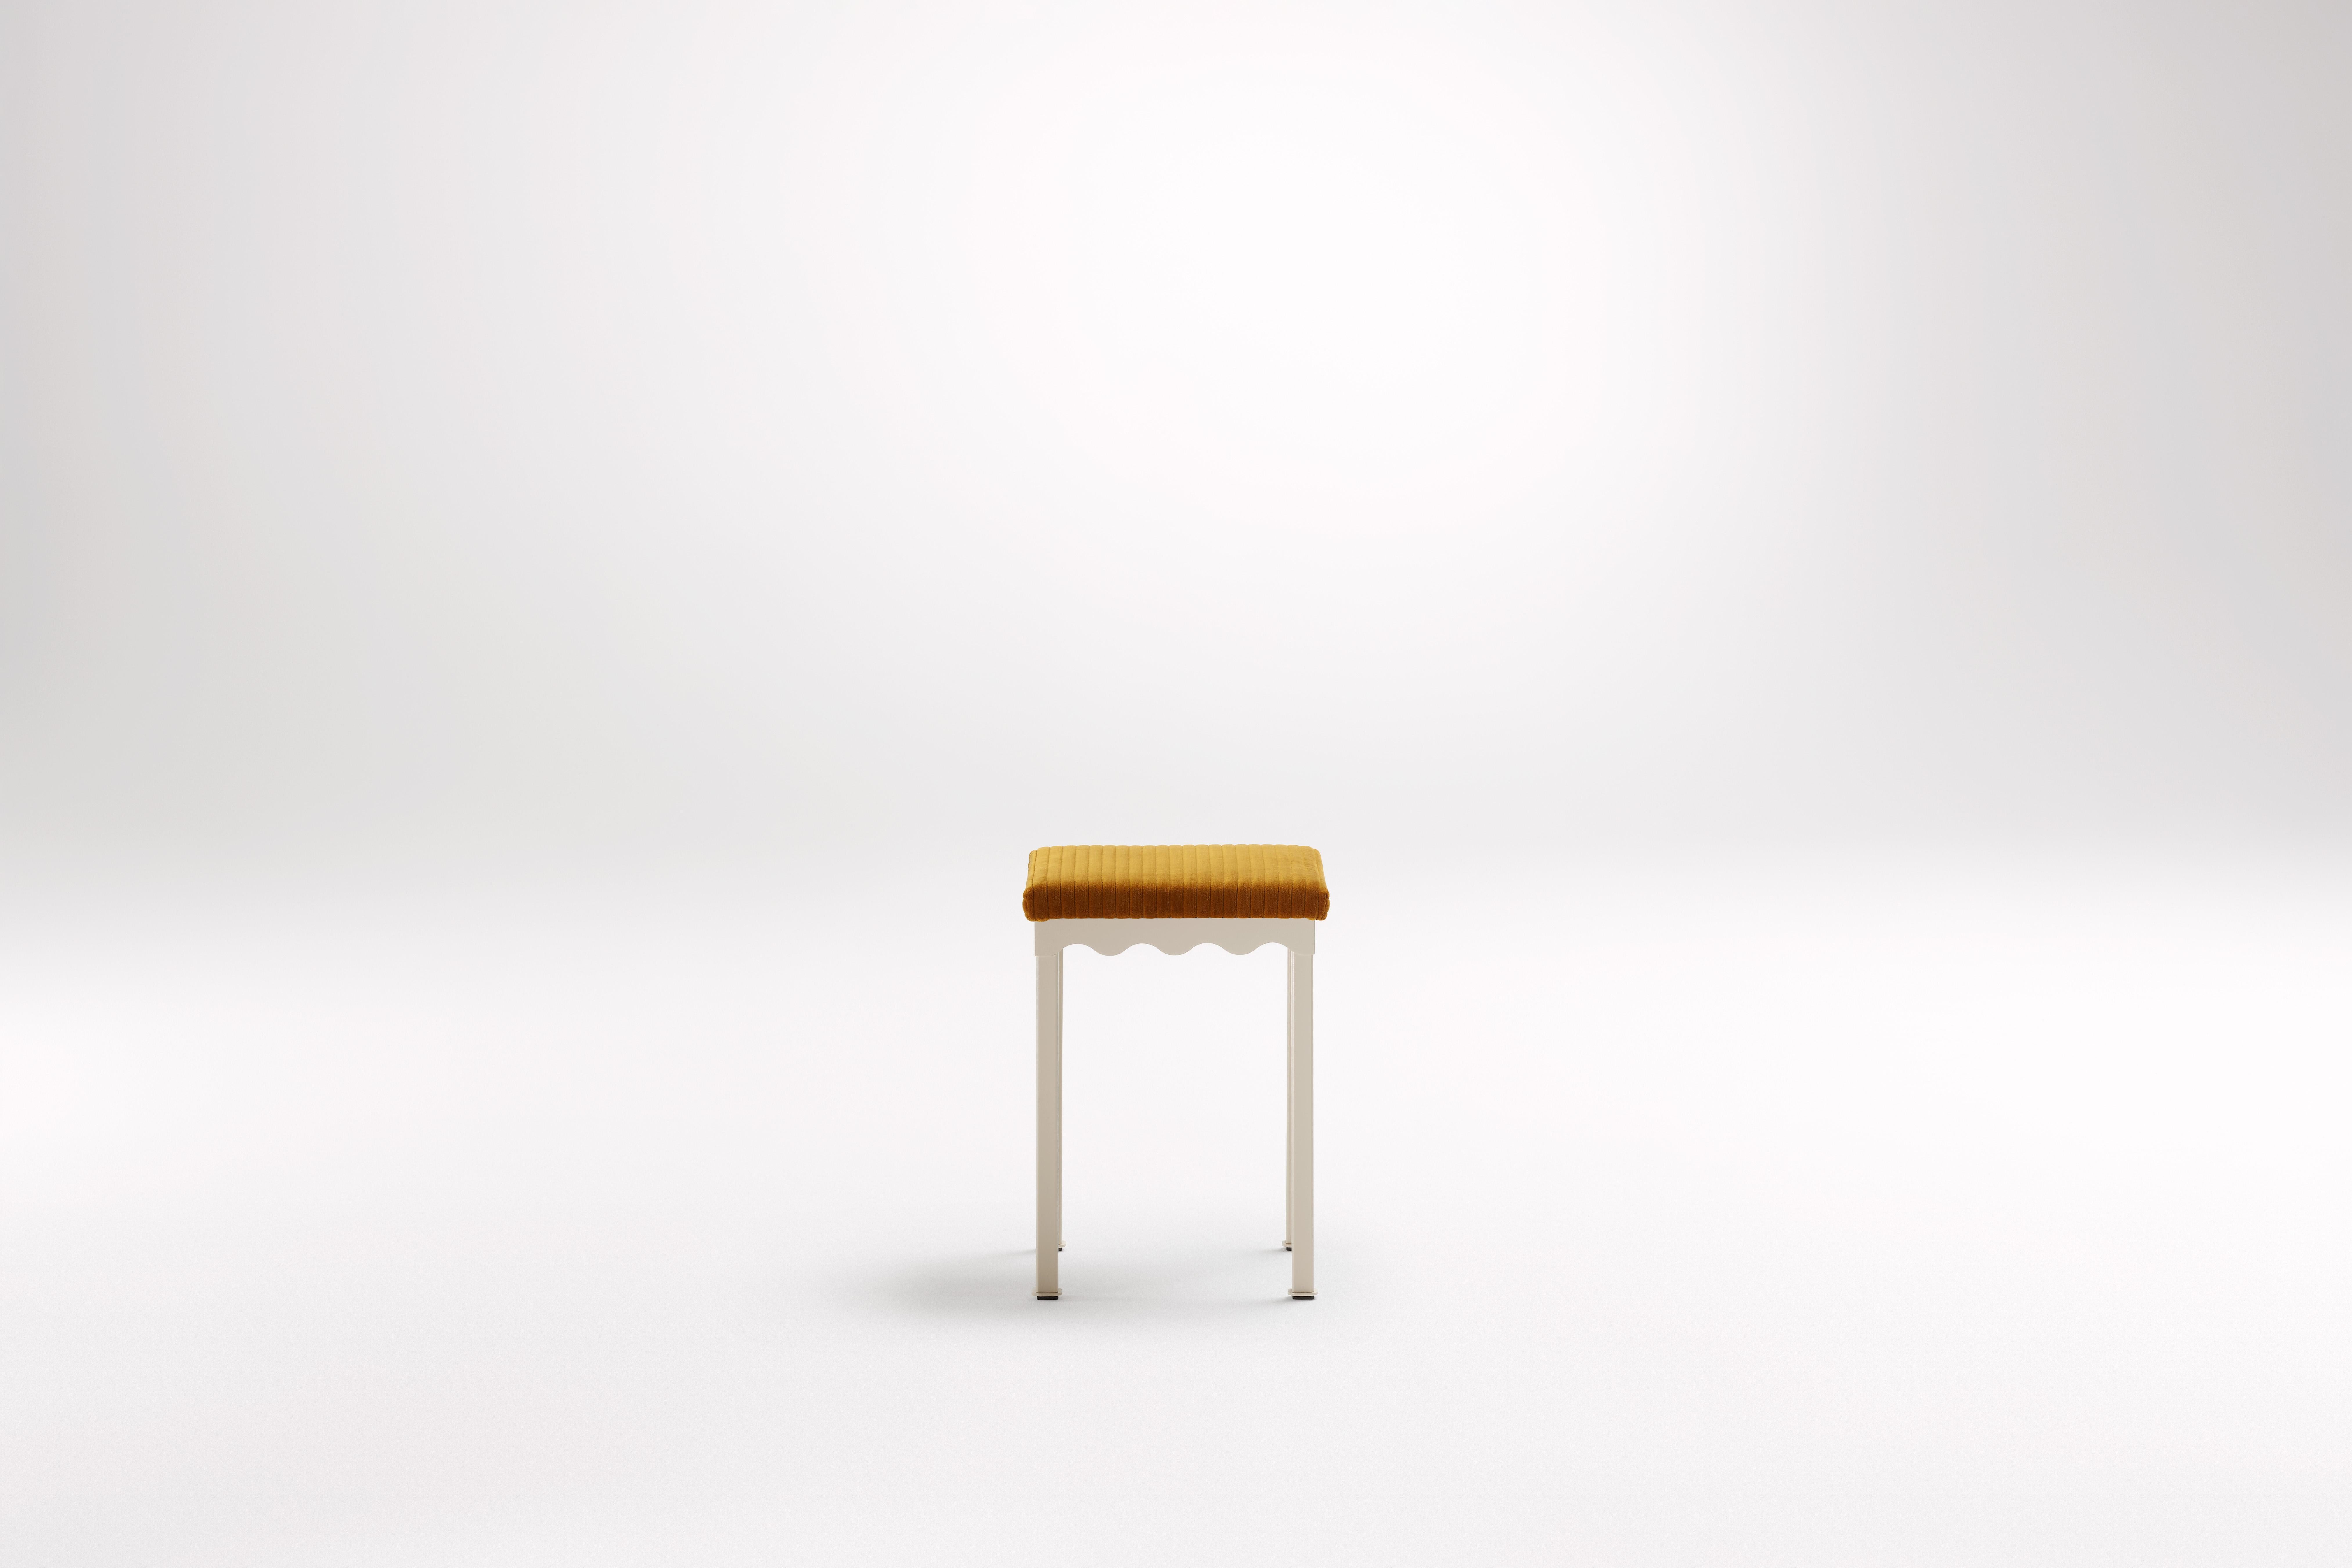 Mikado Bellini Low Stool by Coco Flip
Dimensions: D 34 x W 34 x H 45 cm
Materials: Timber / Stone tops, Powder-coated steel frame. 
Weight: 5 kg
Frame Finishes: Textura Paperbark.

Coco Flip is a Melbourne based furniture and lighting design studio,